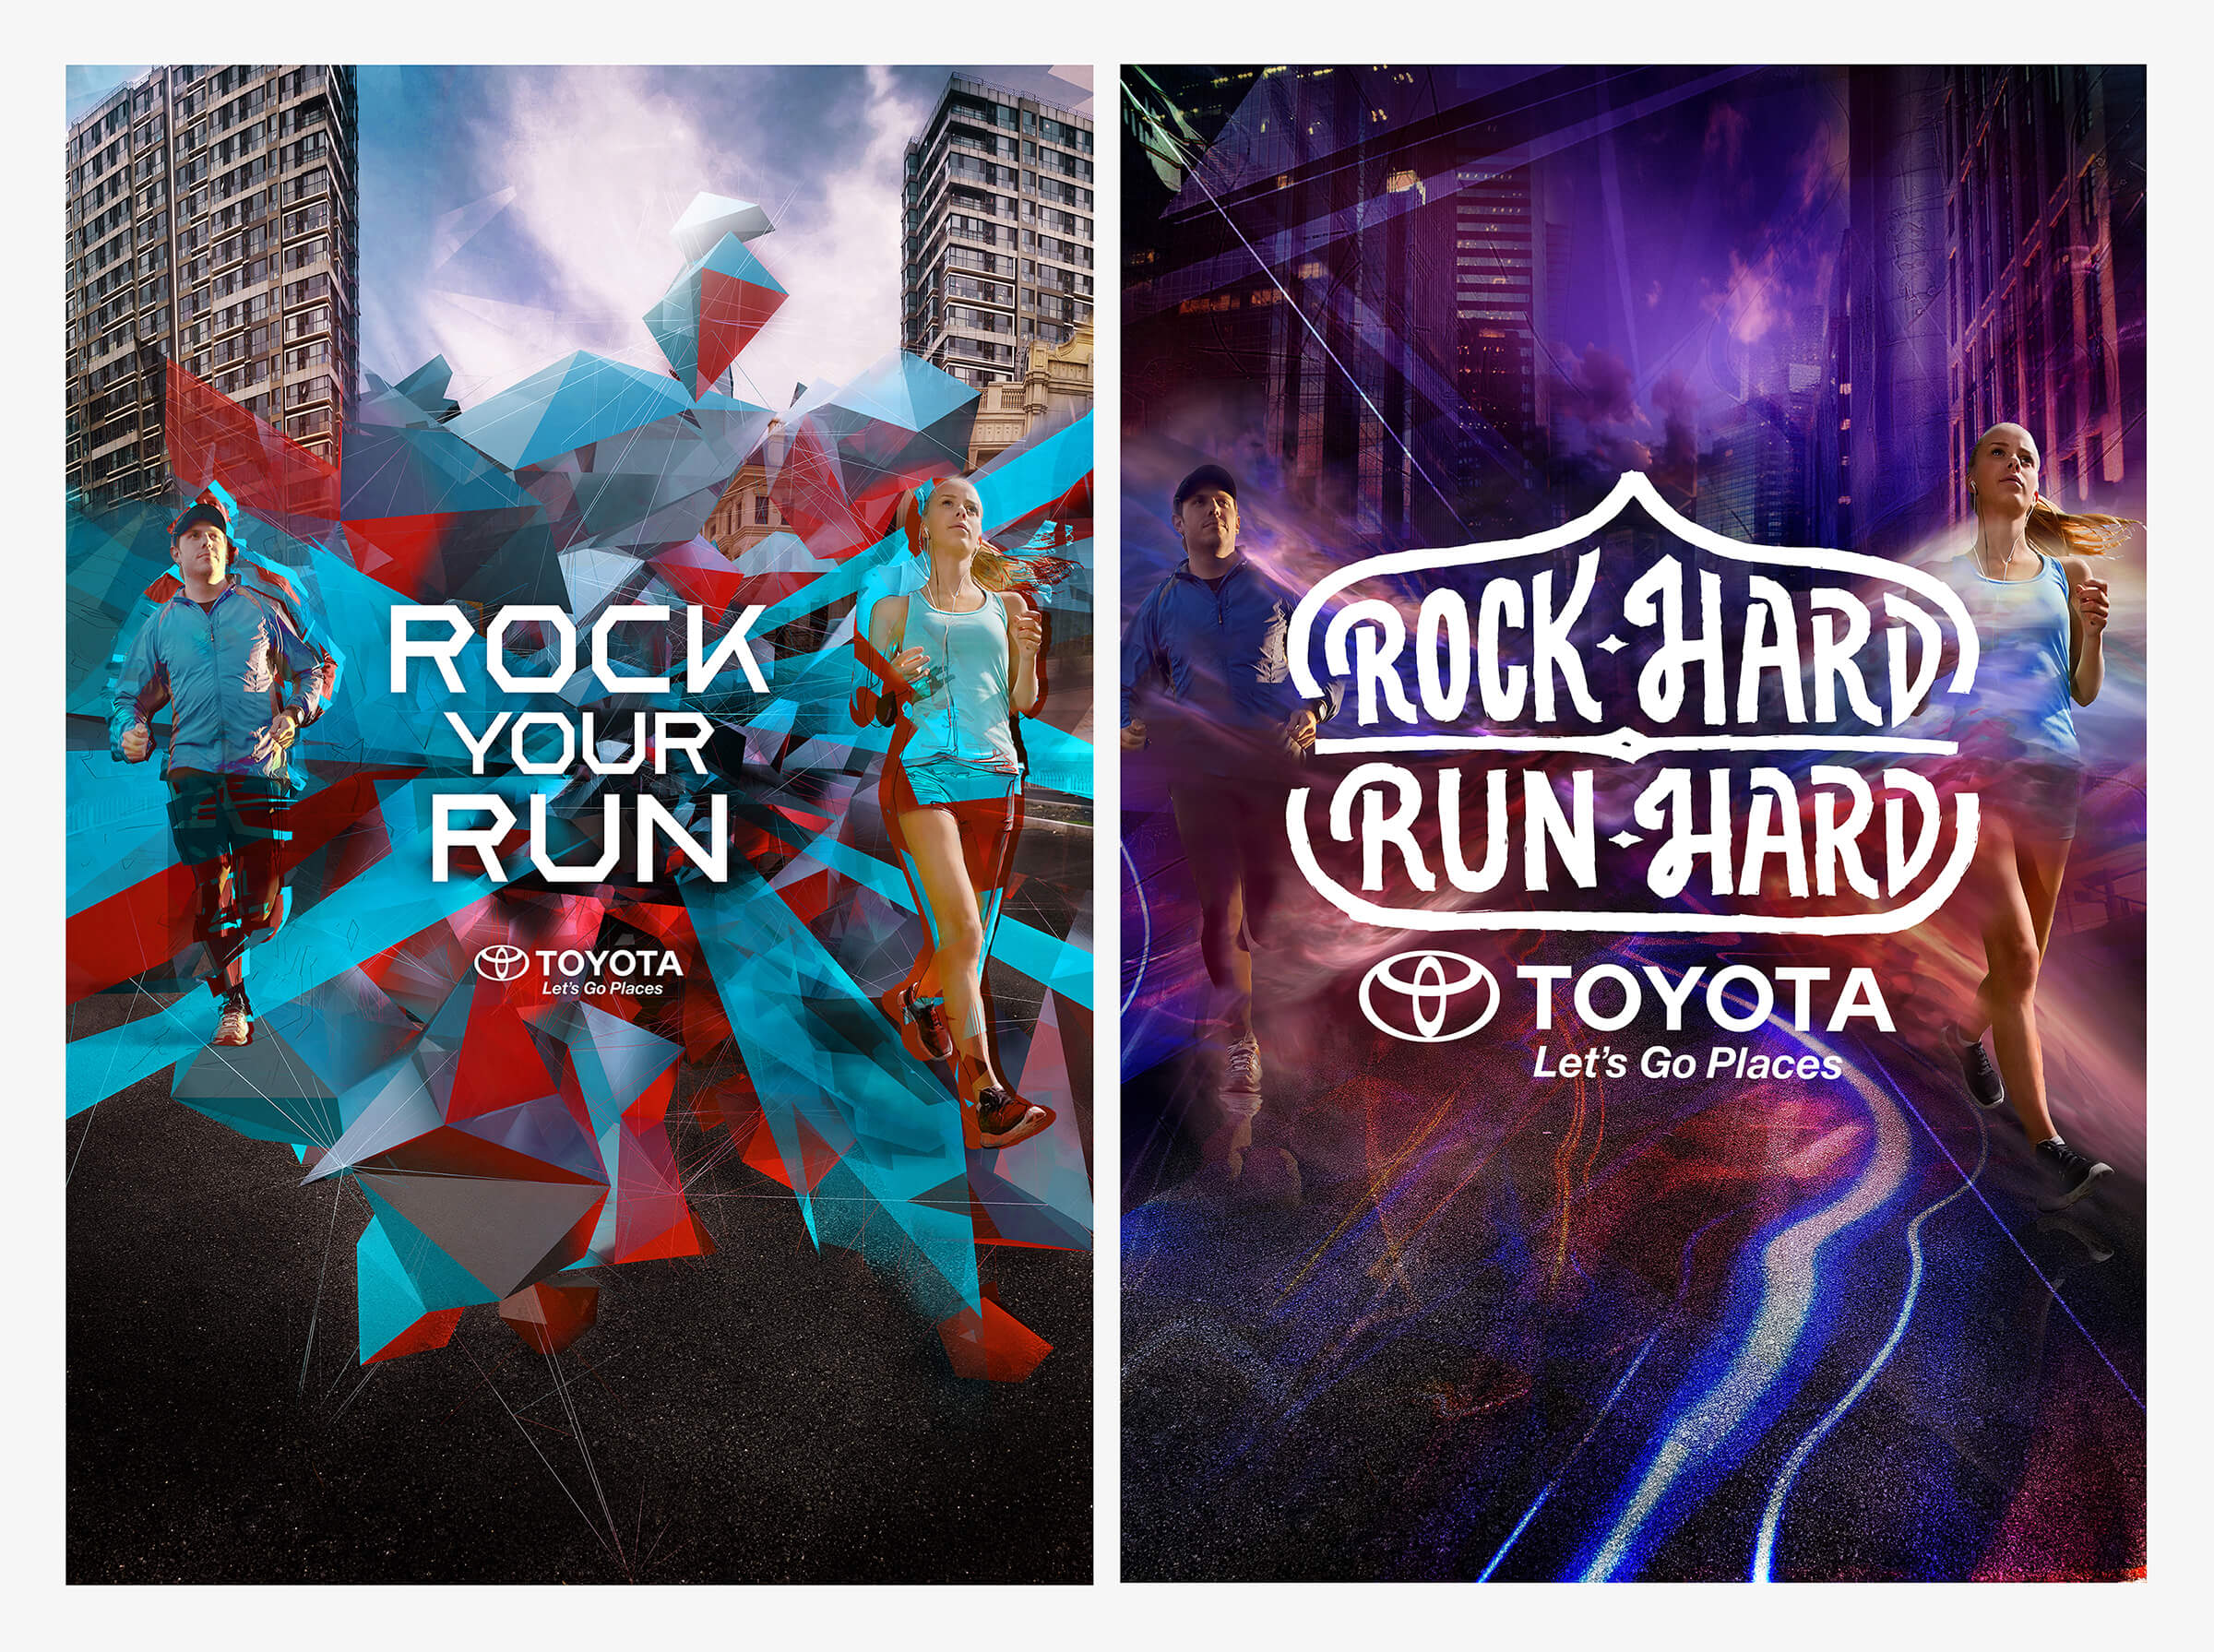 Pitched directions for Toyota Rock Your Run featuring dynamic geometric fragments with a male and female runner and city scape with the words Rock Your Run for the first direction. For the second direction featuring the words Rock Hard Run Hard with the light streams, a male and female runner, and a night city scape.